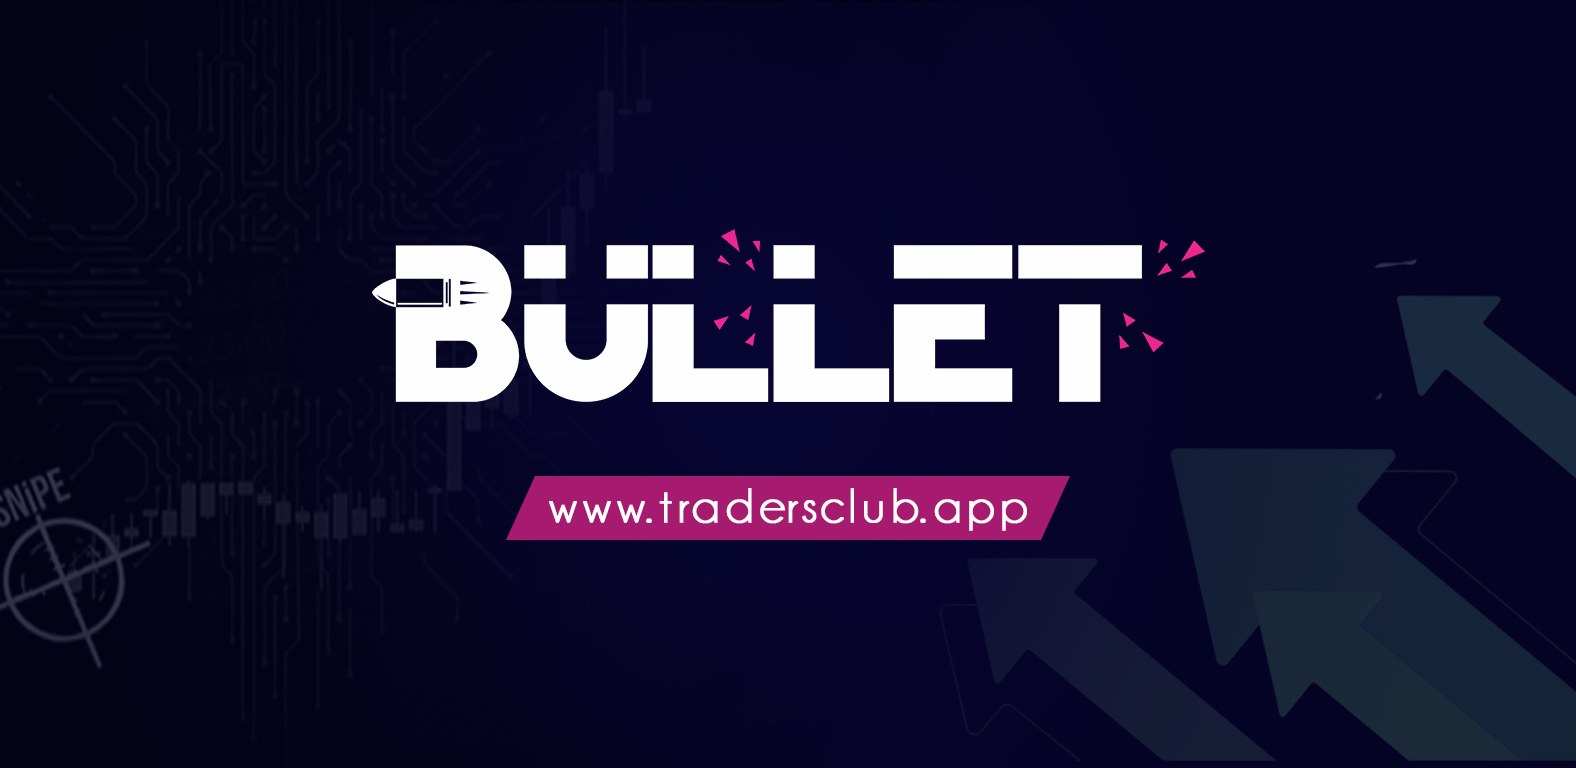 TradersClub is pleased to announce The BulletAn Innovation within DeFI for traders.